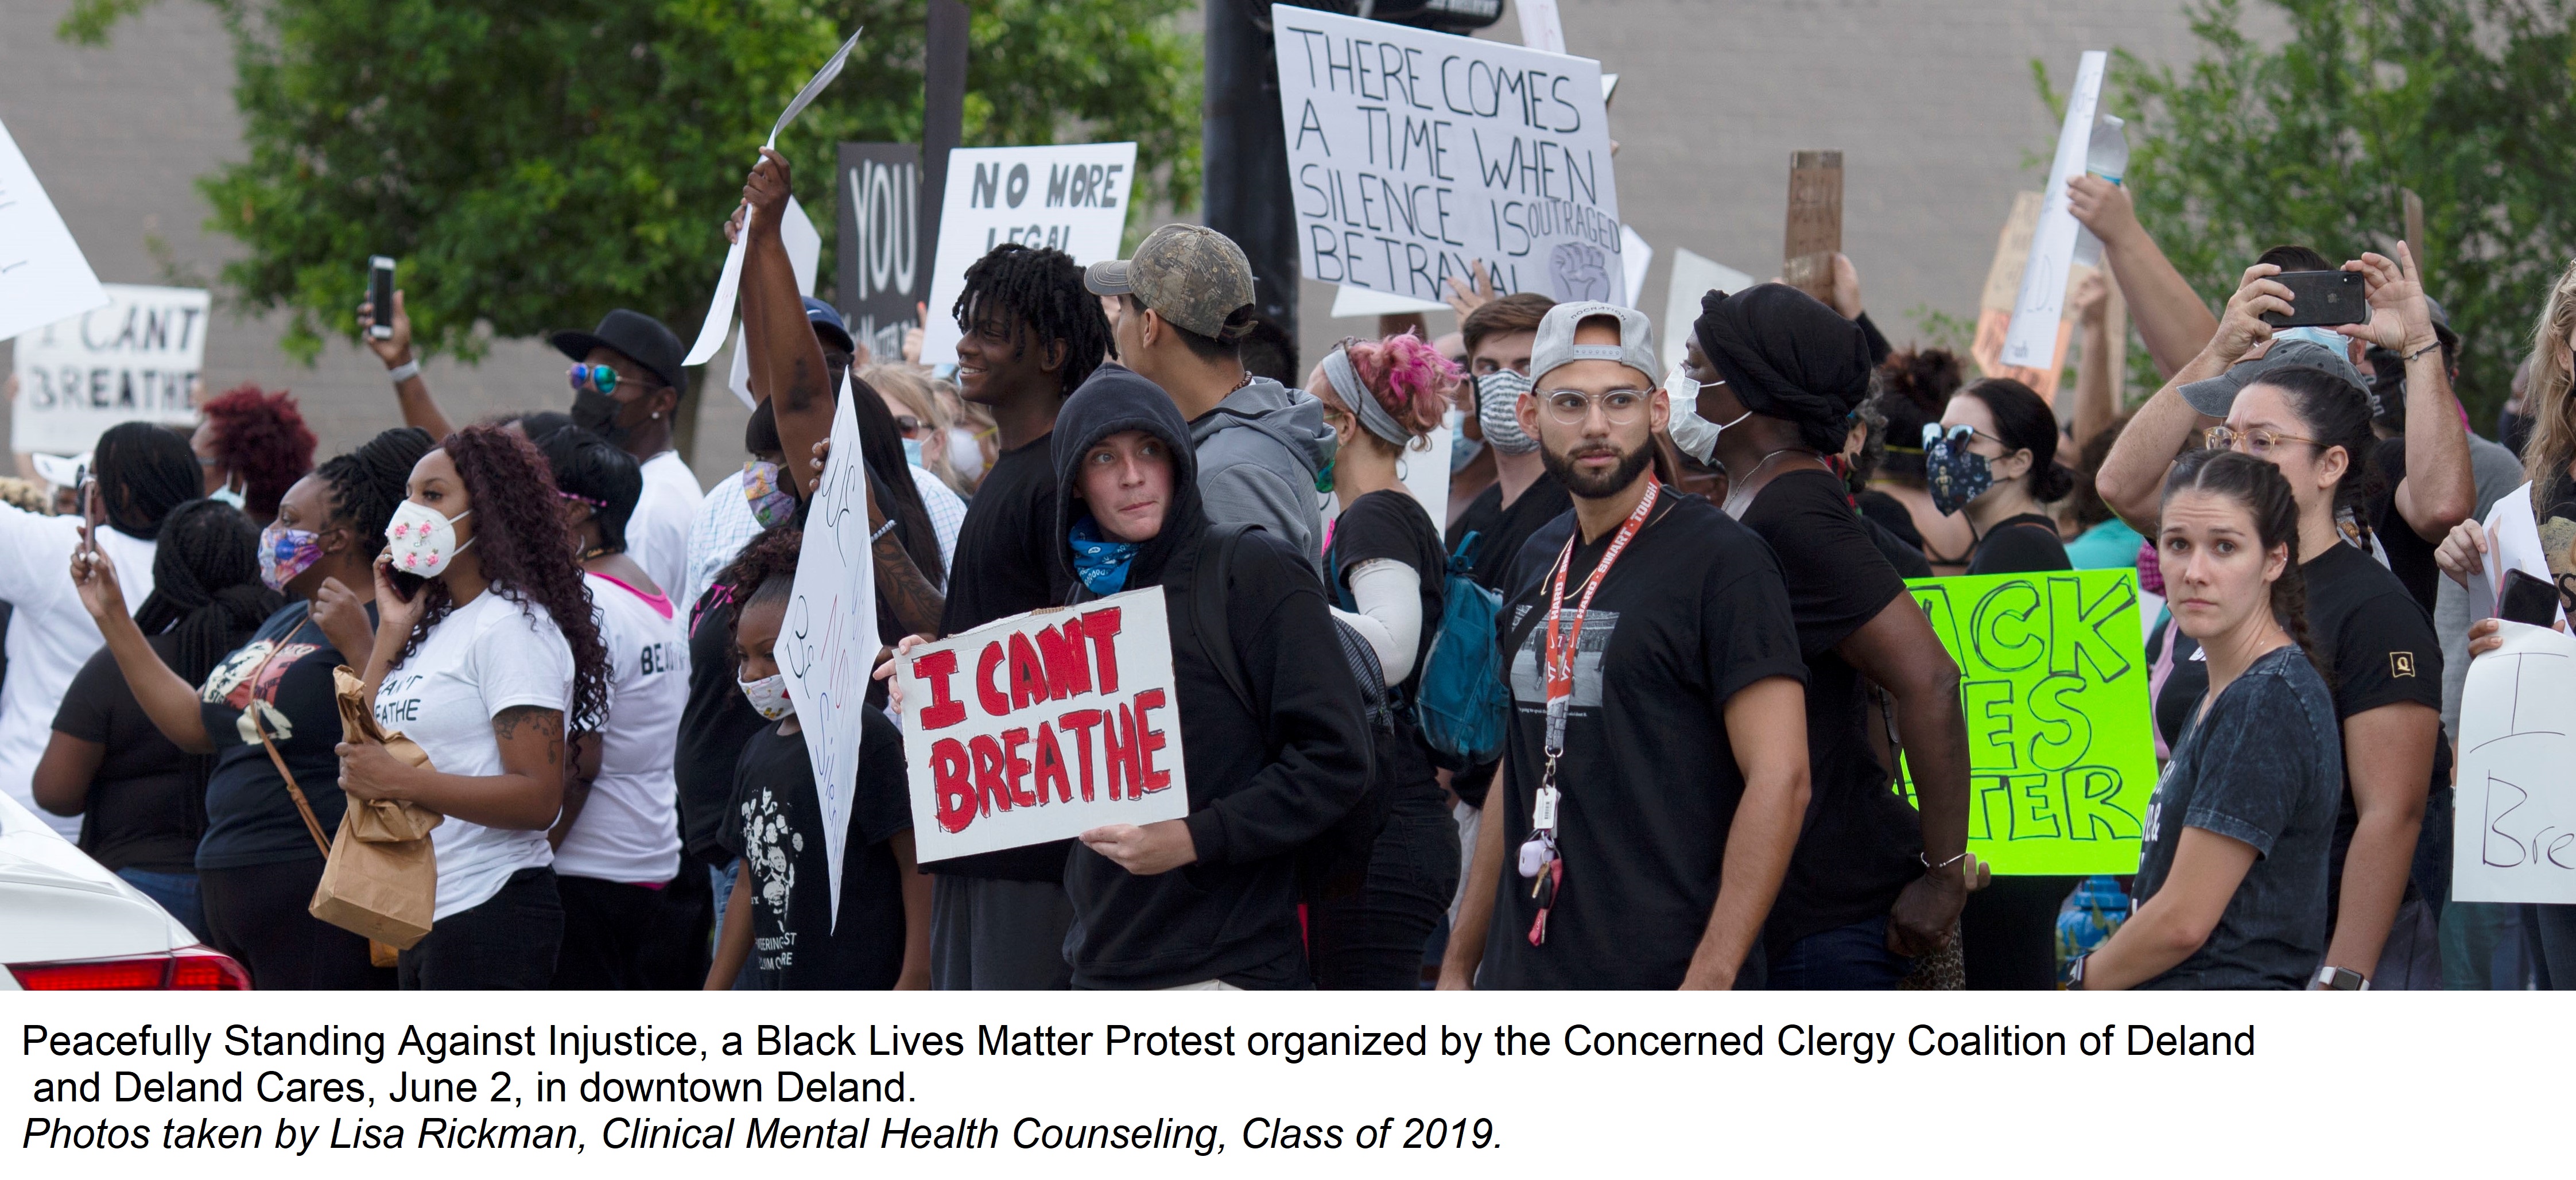 Peacefully Standing Against Injustice, BLM Protestor, June 2